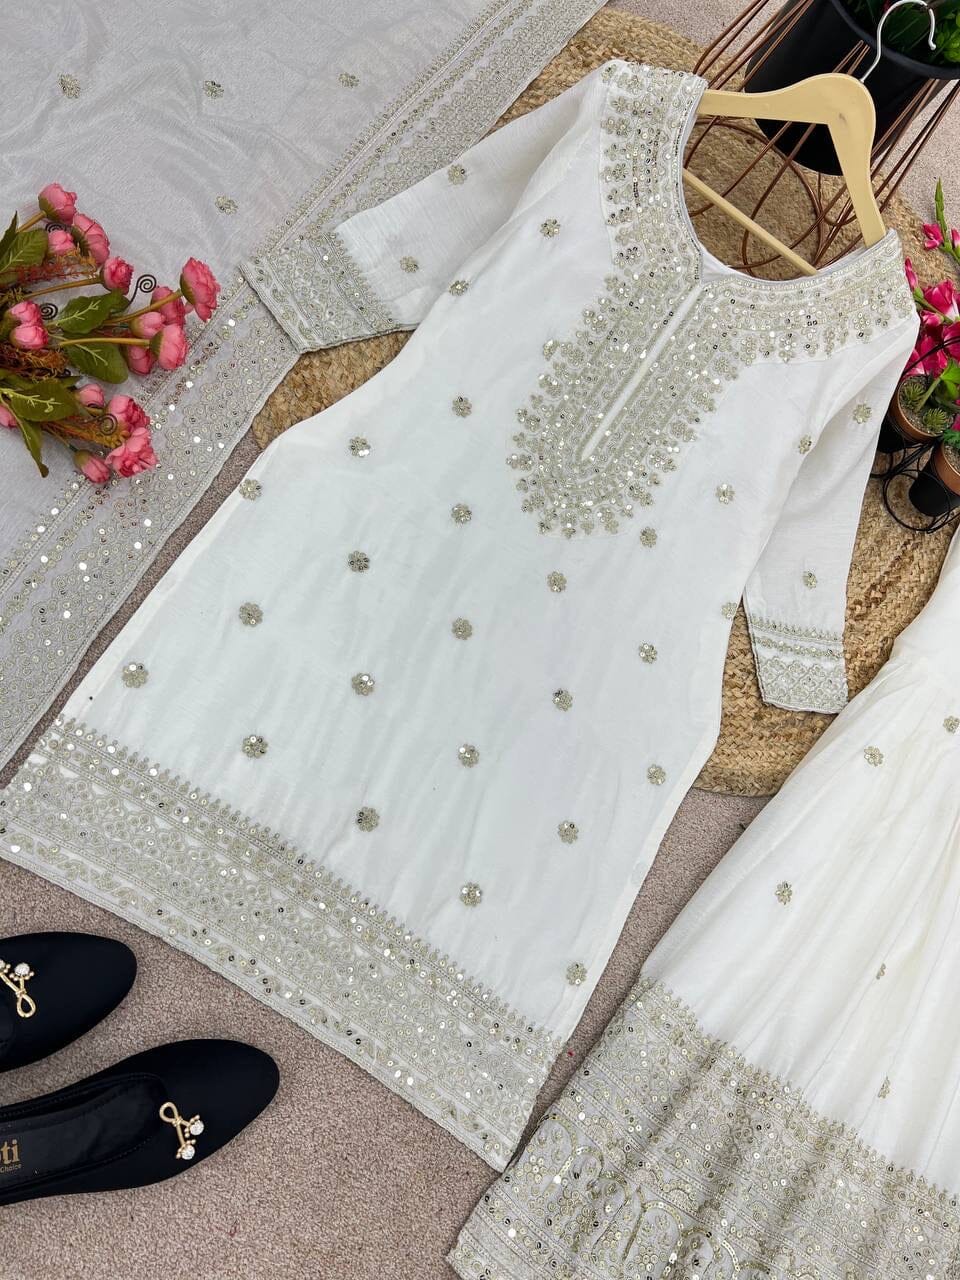 Chinnon Silk Heavy Sequence White Designer Readymade Suit Ready Made Designer Suits Shopin Di Apparels 